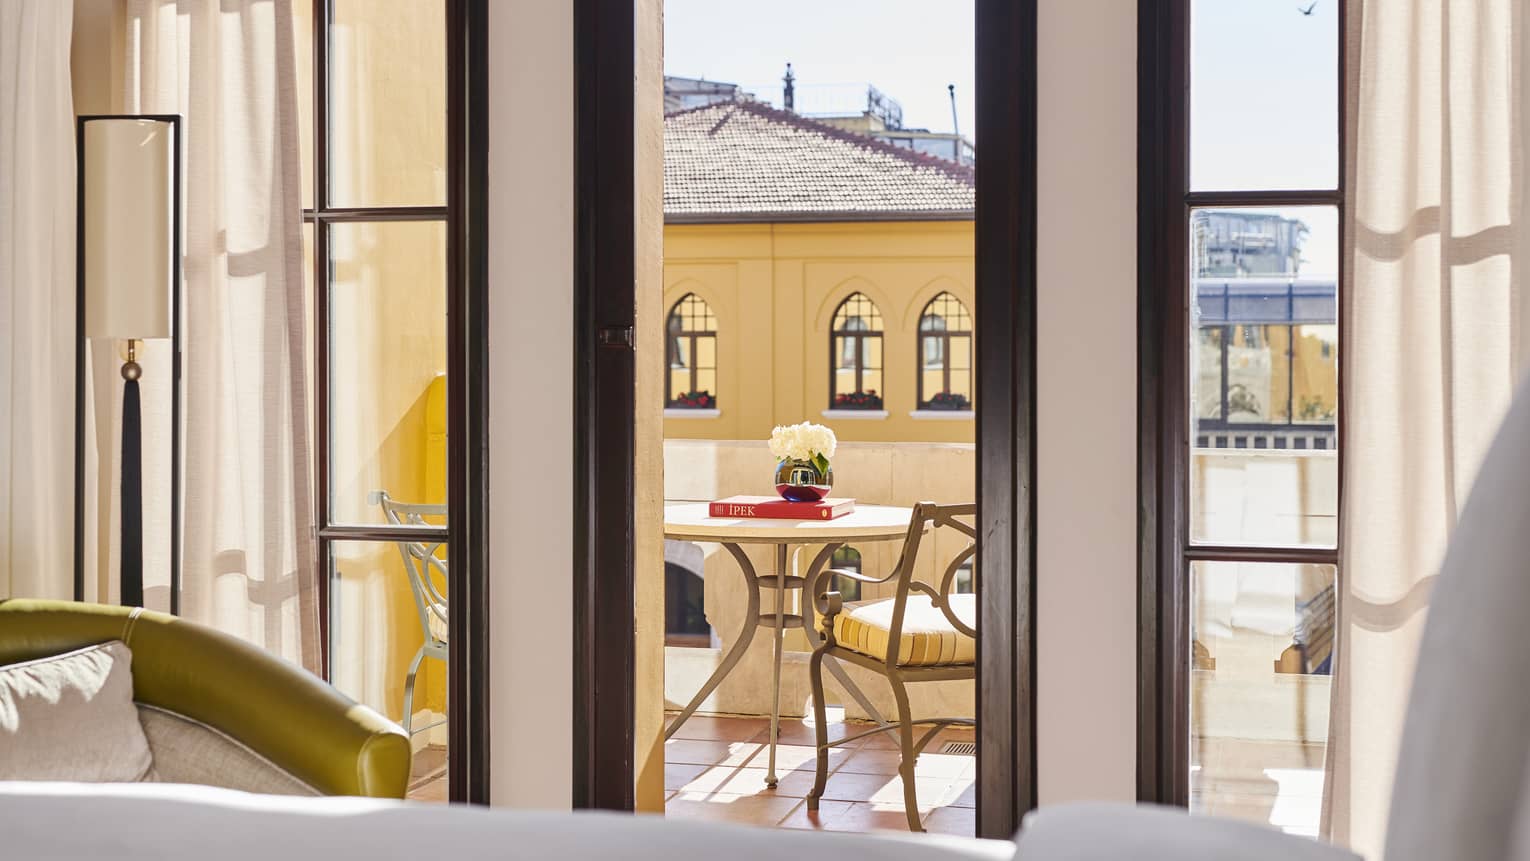 Hotel suite’s tall dark-framed windows with view onto terrace with café seating across from historic building